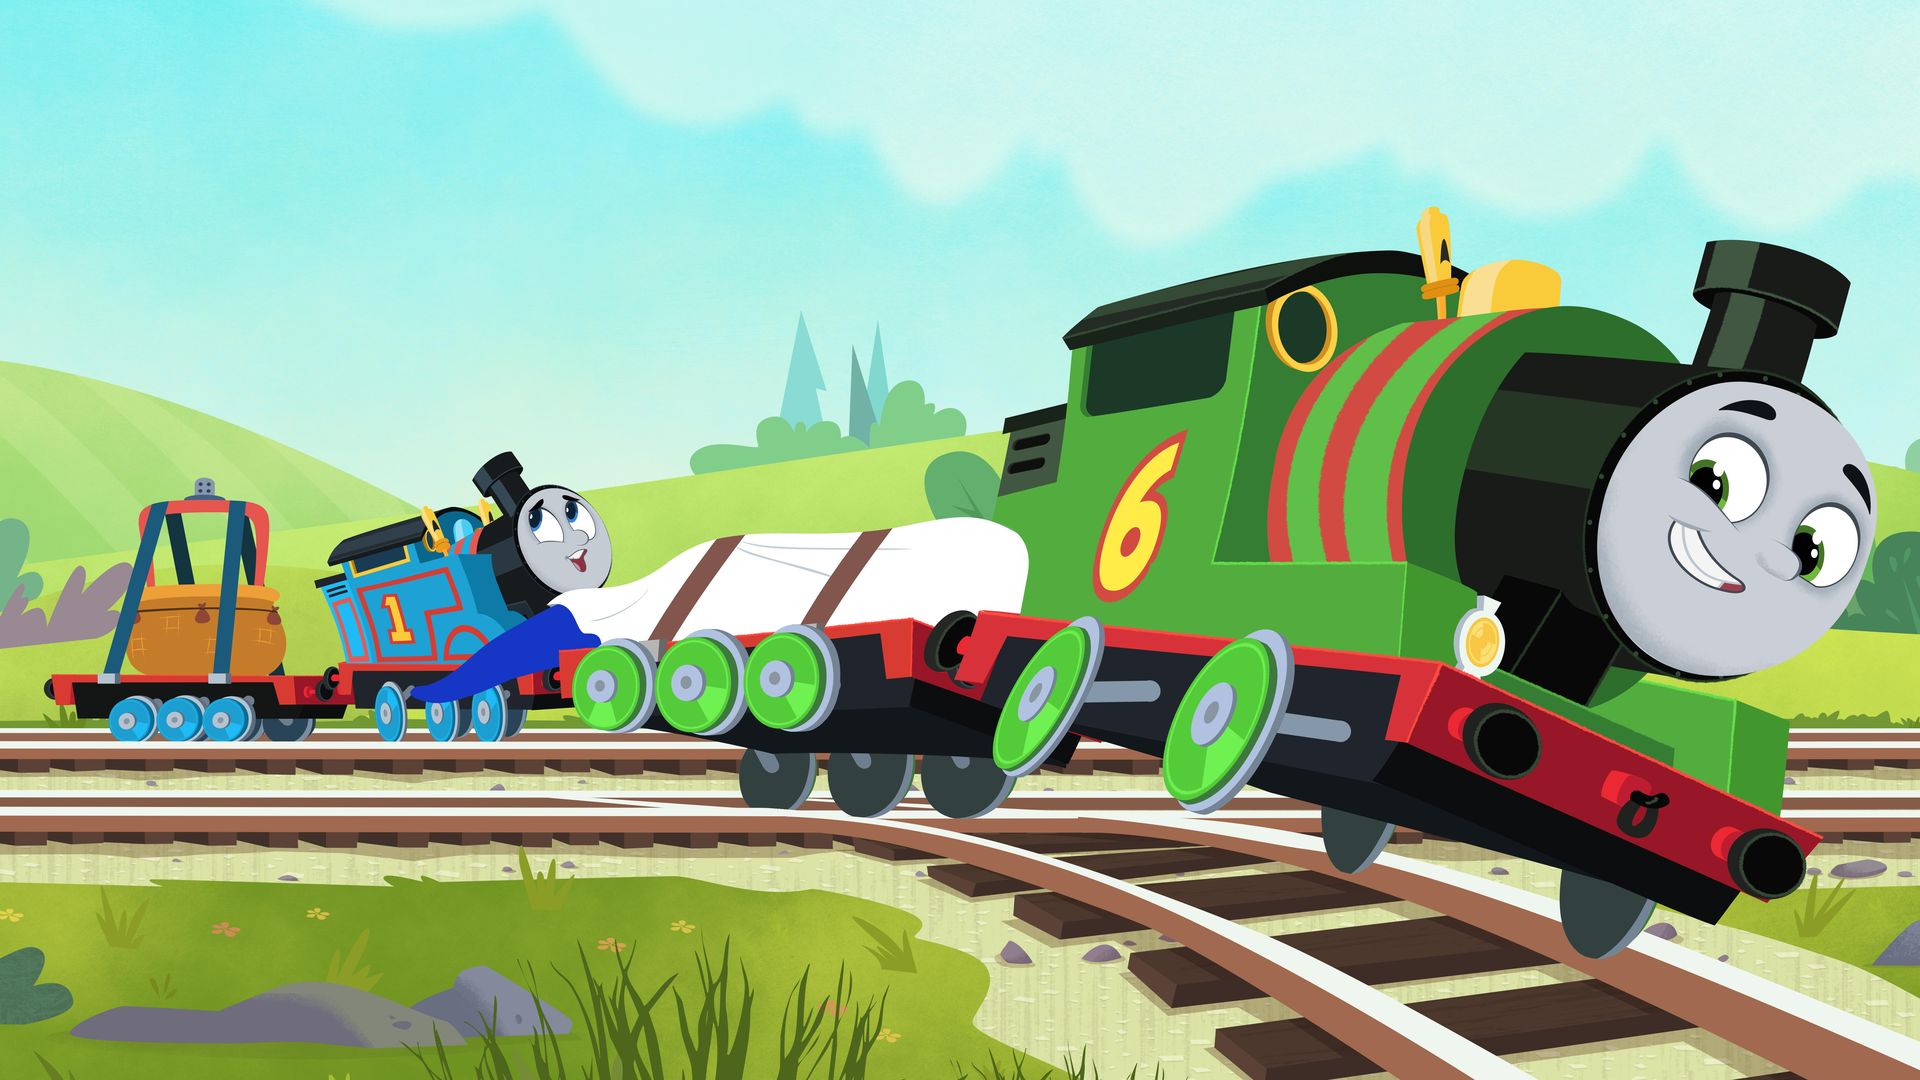 Hot Air Percy. Thomas & Friends: All Engines Go